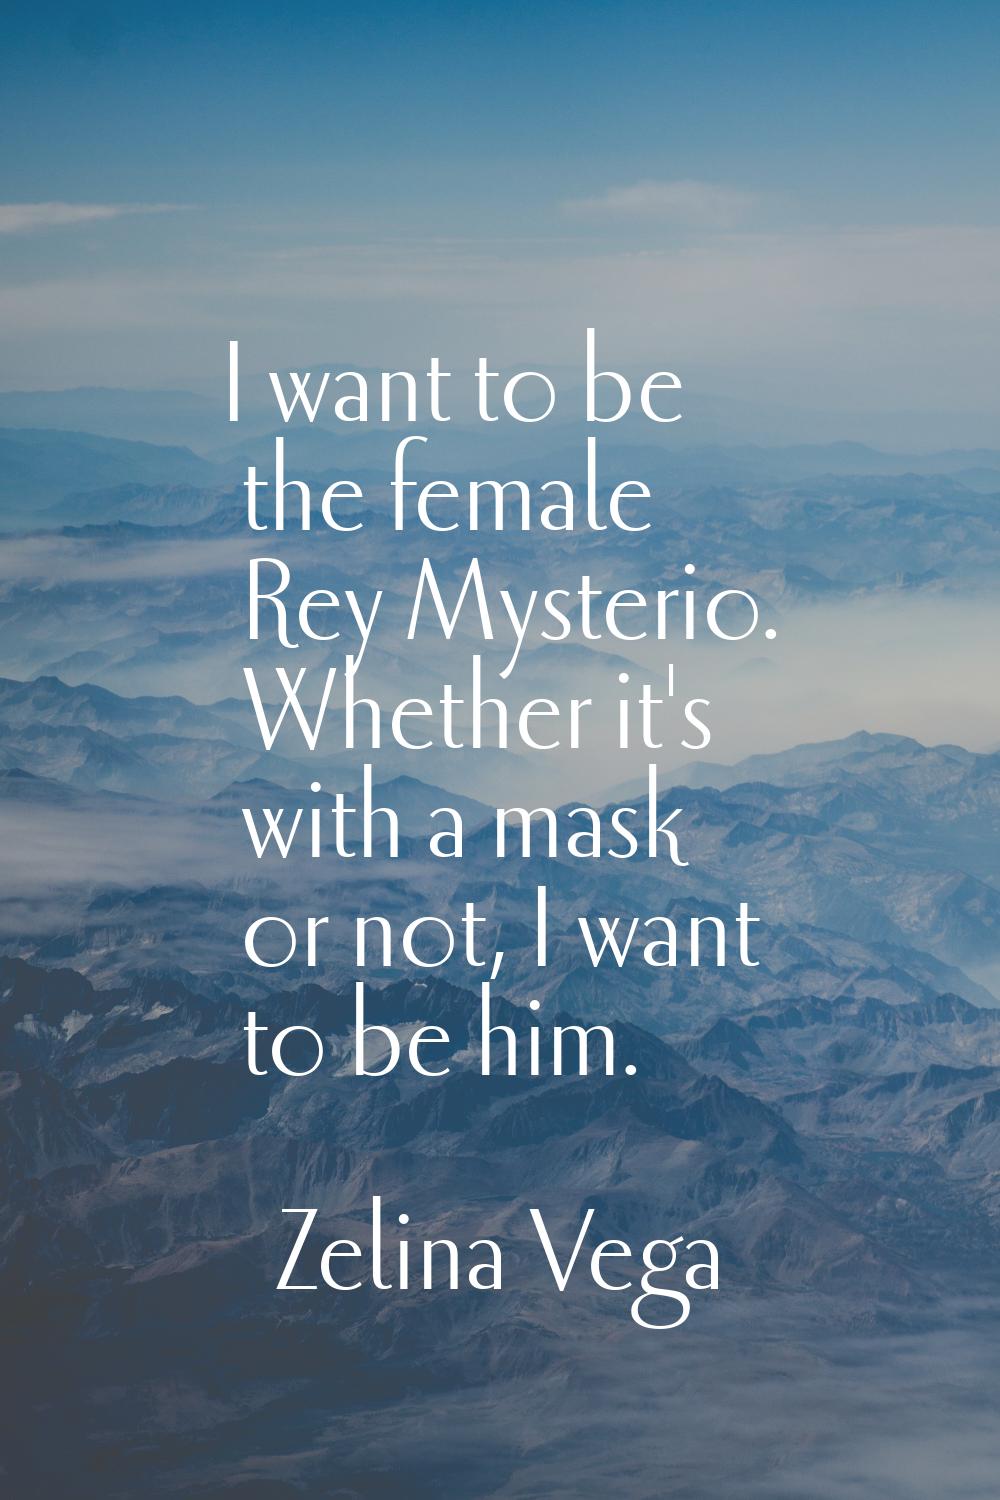 I want to be the female Rey Mysterio. Whether it's with a mask or not, I want to be him.